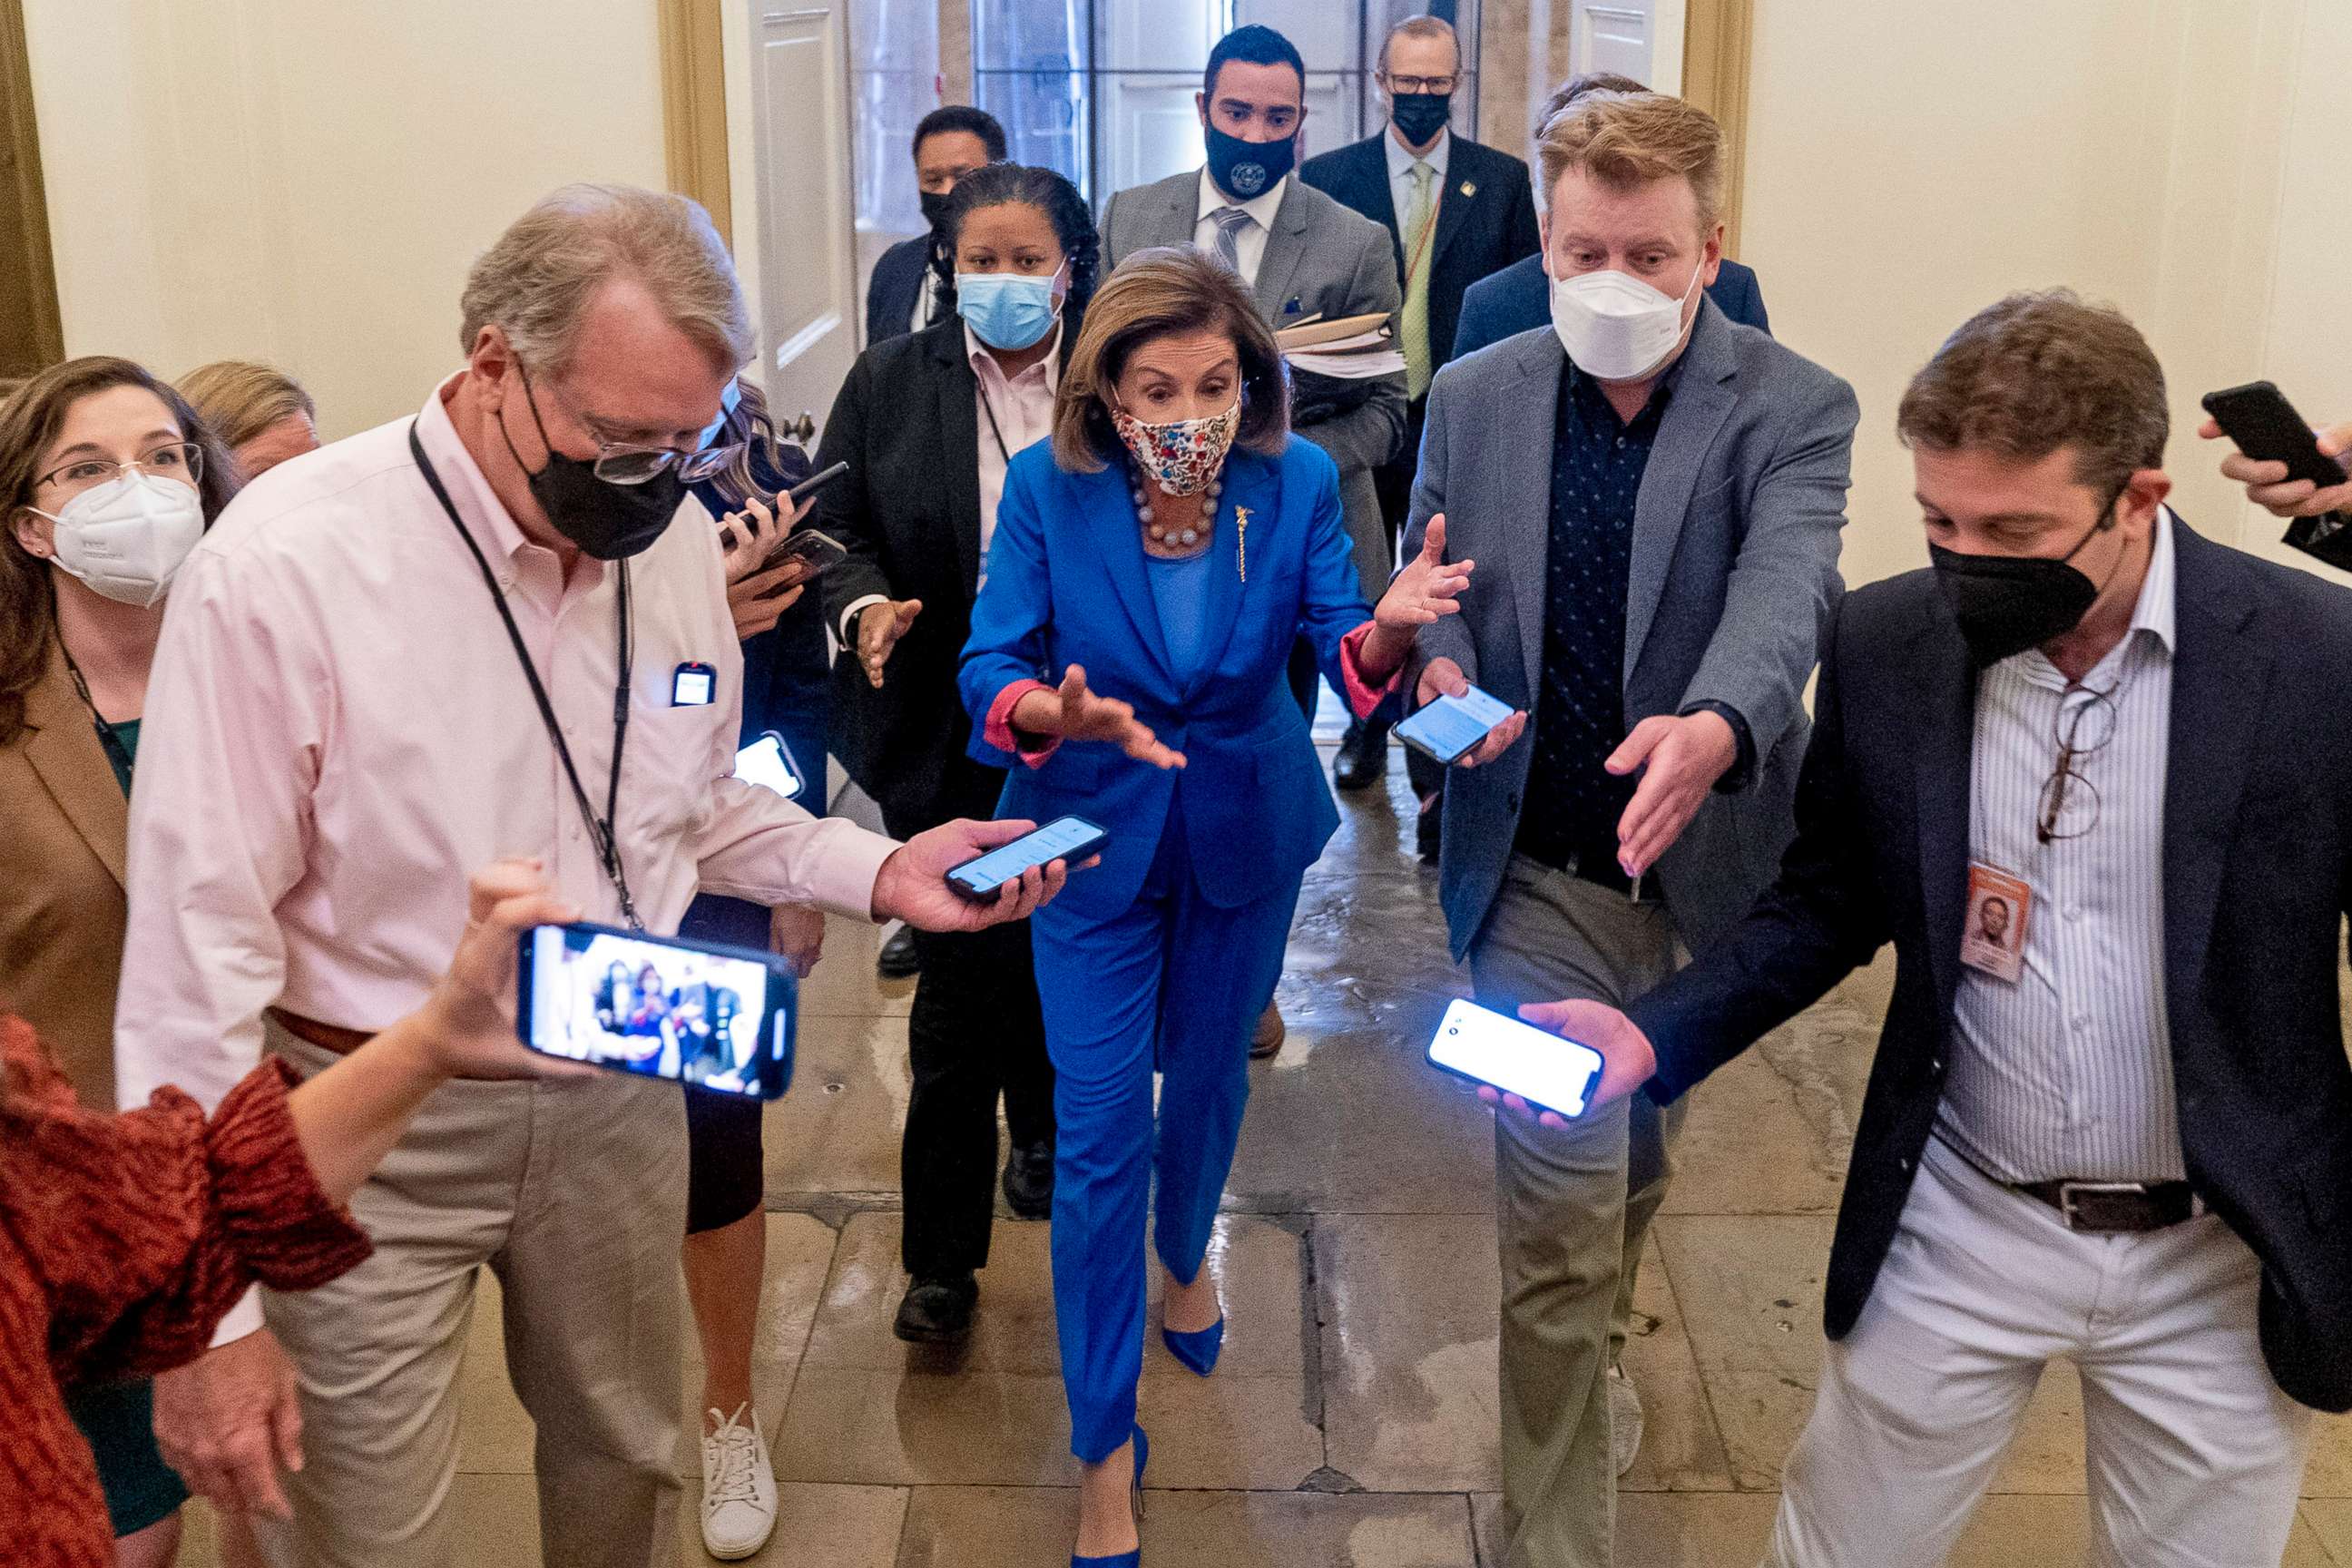 PHOTO: House Speaker Nancy Pelosi arrives at the U.S. Capitol, Sept. 30, 2021, in Washington, D.C. Pelosi indicated she may shelve a Thursday vote on a $1 trillion public works bill without movement on Biden's package.